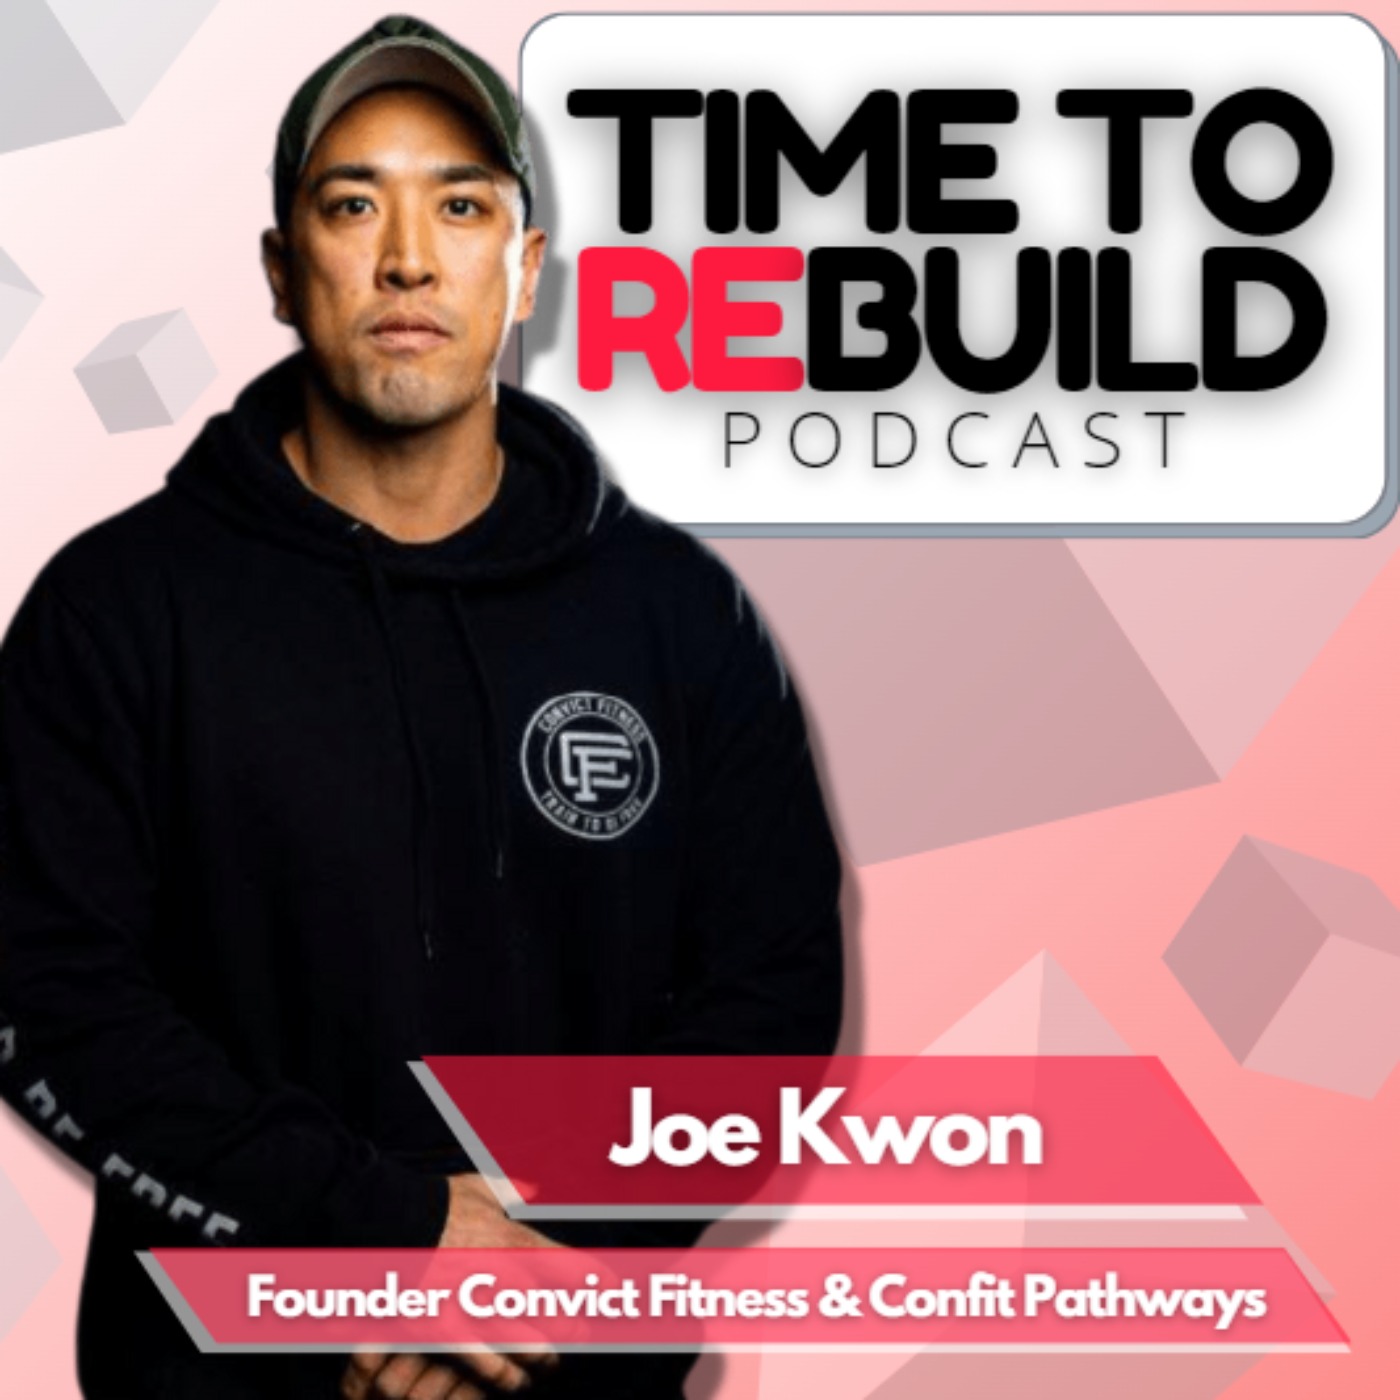 30. How To Train Like They Do in Prison with Joe Kwon